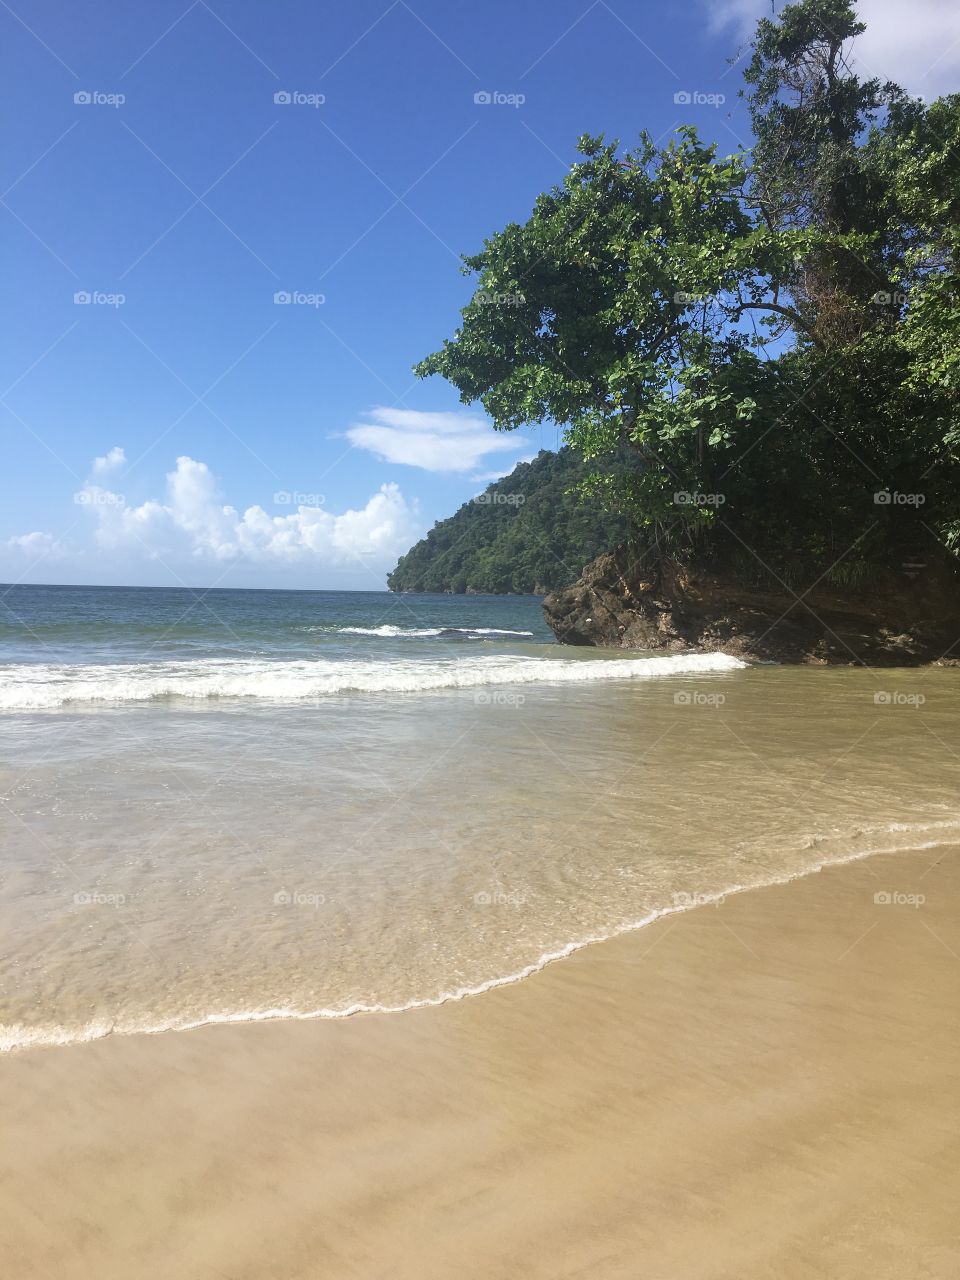 Just a little vacation in Trinidad. Beautiful day to go to the beach and I captured this beauty!